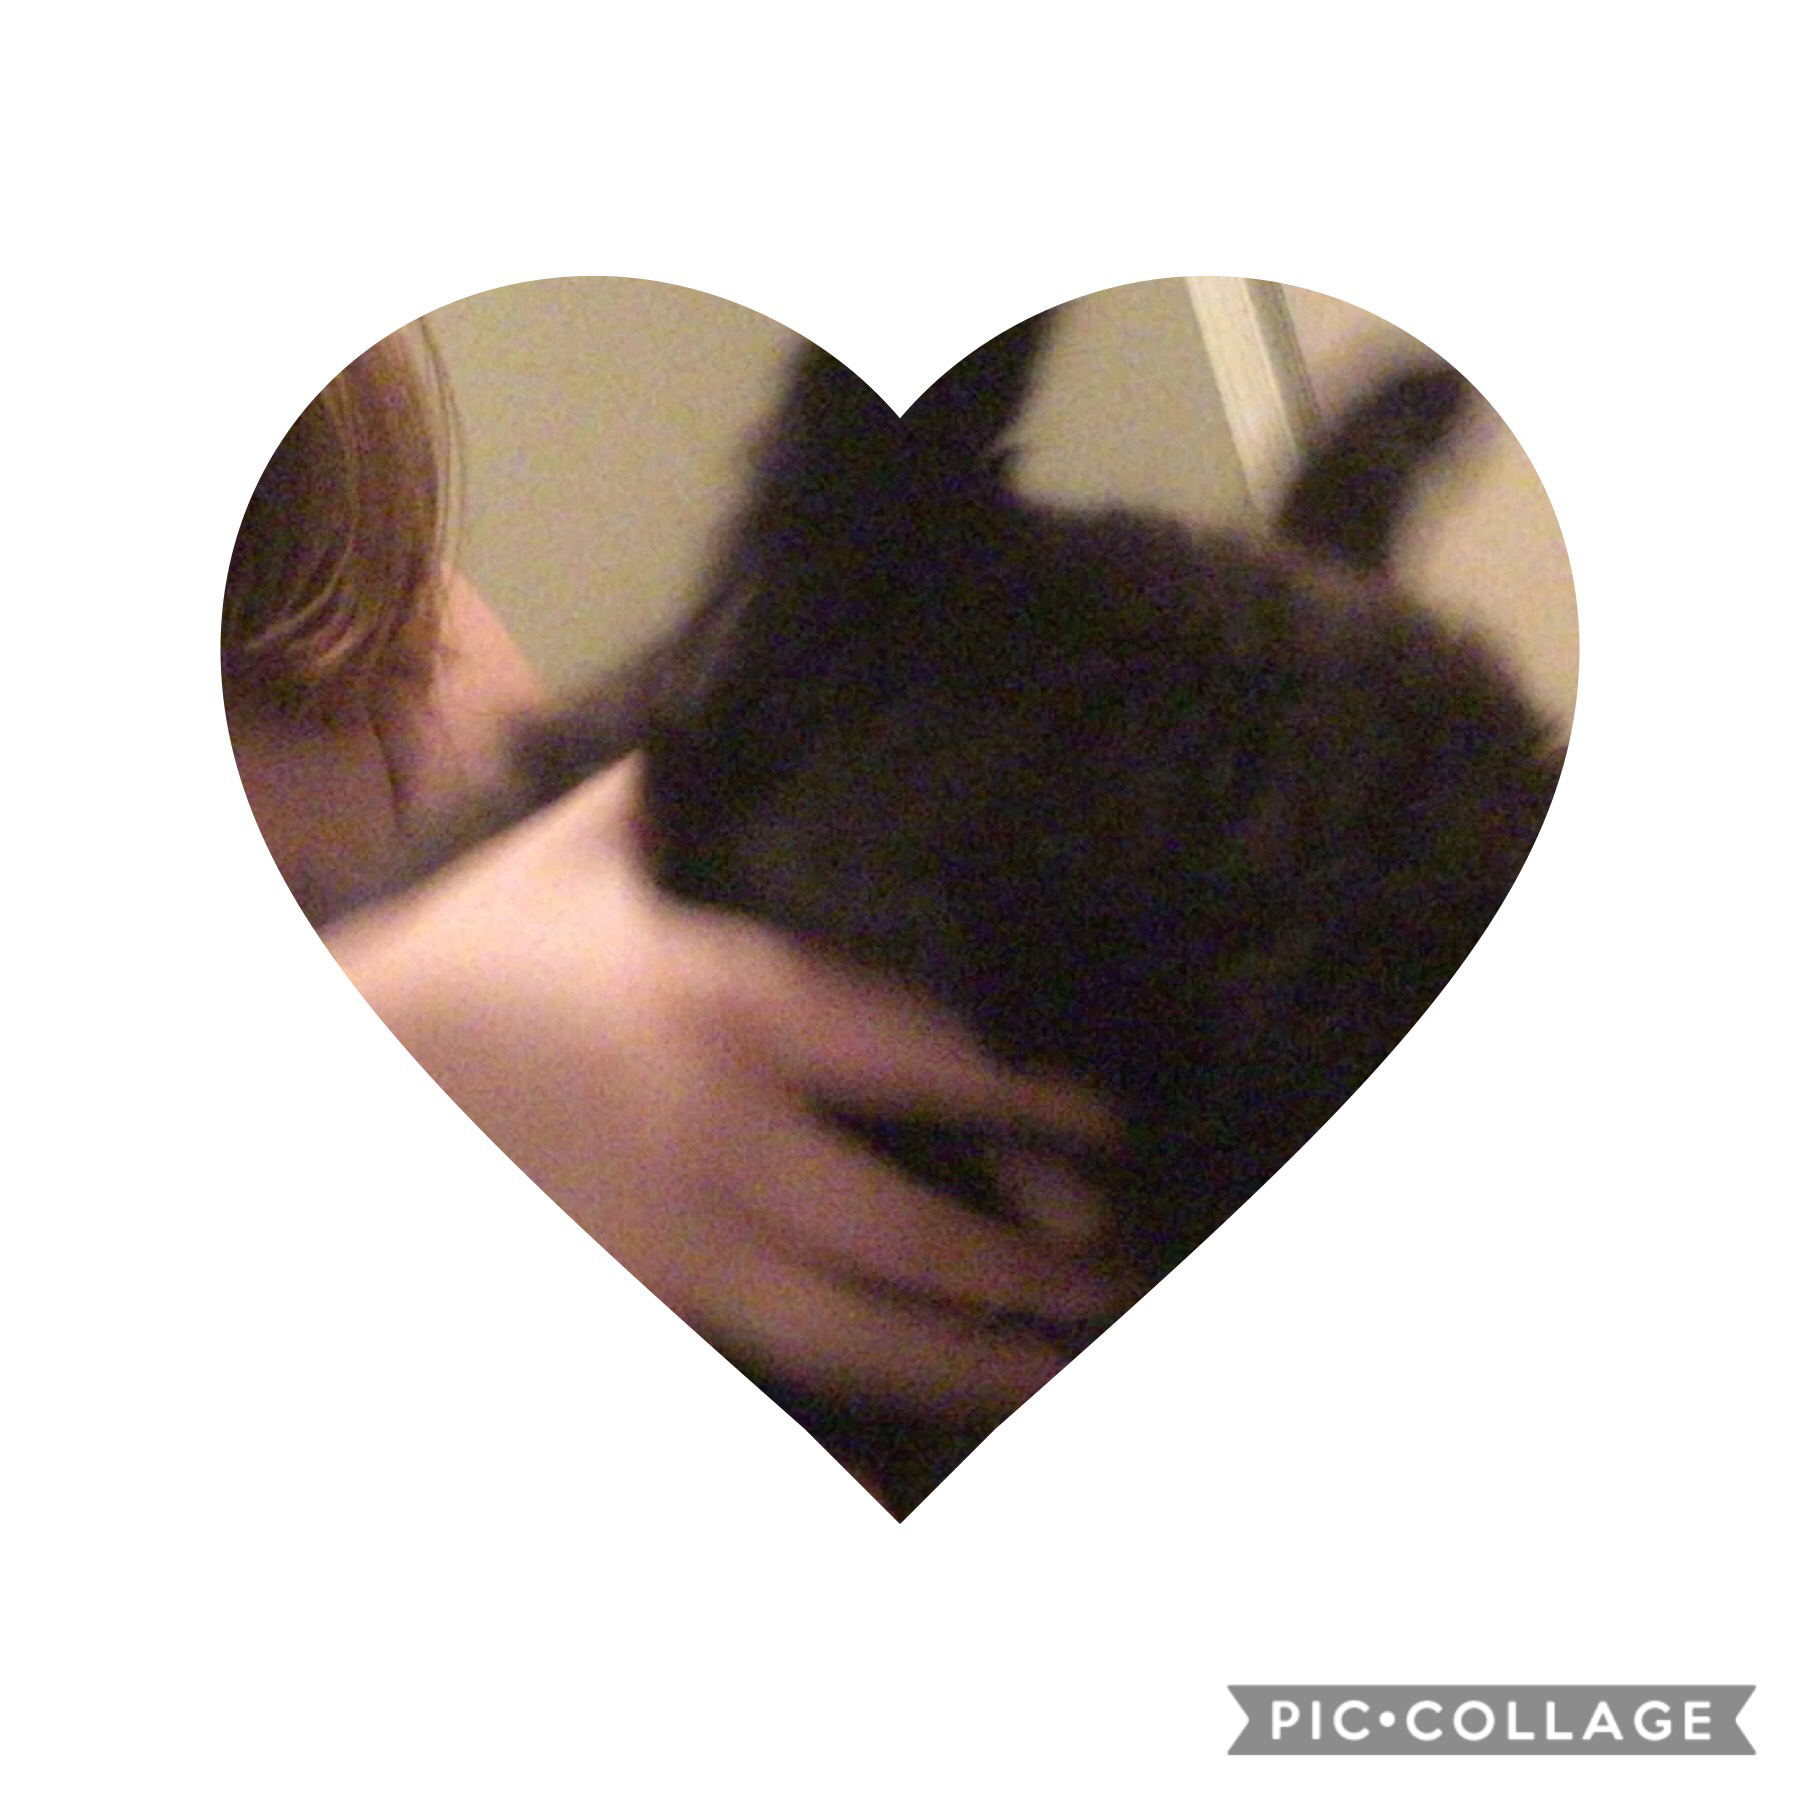 My adorable cat face reveal is my next post!